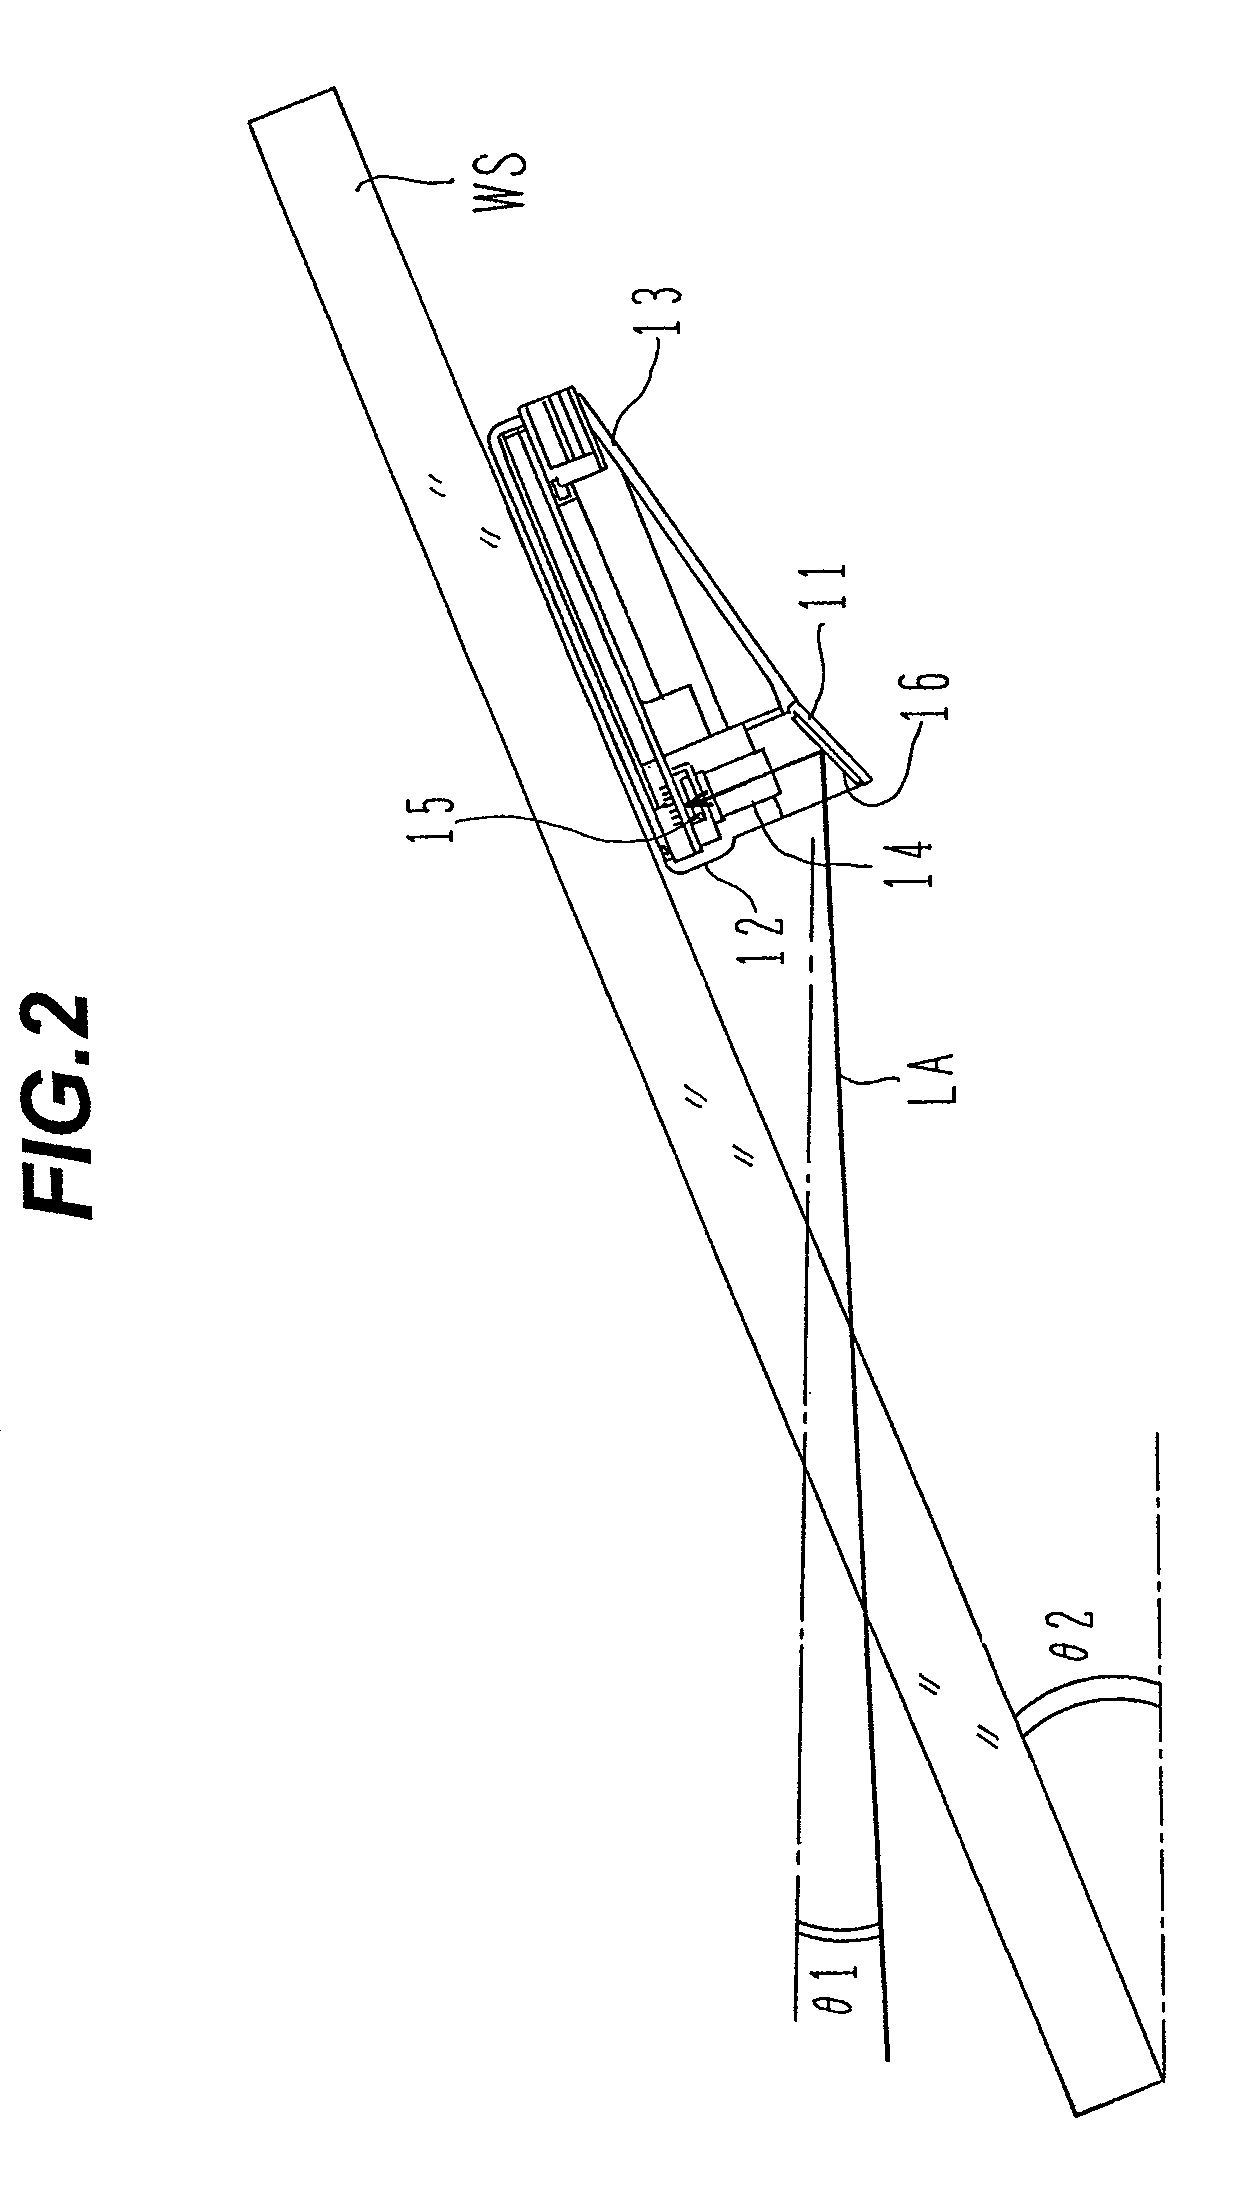 Camera for mounting in motor vehicle